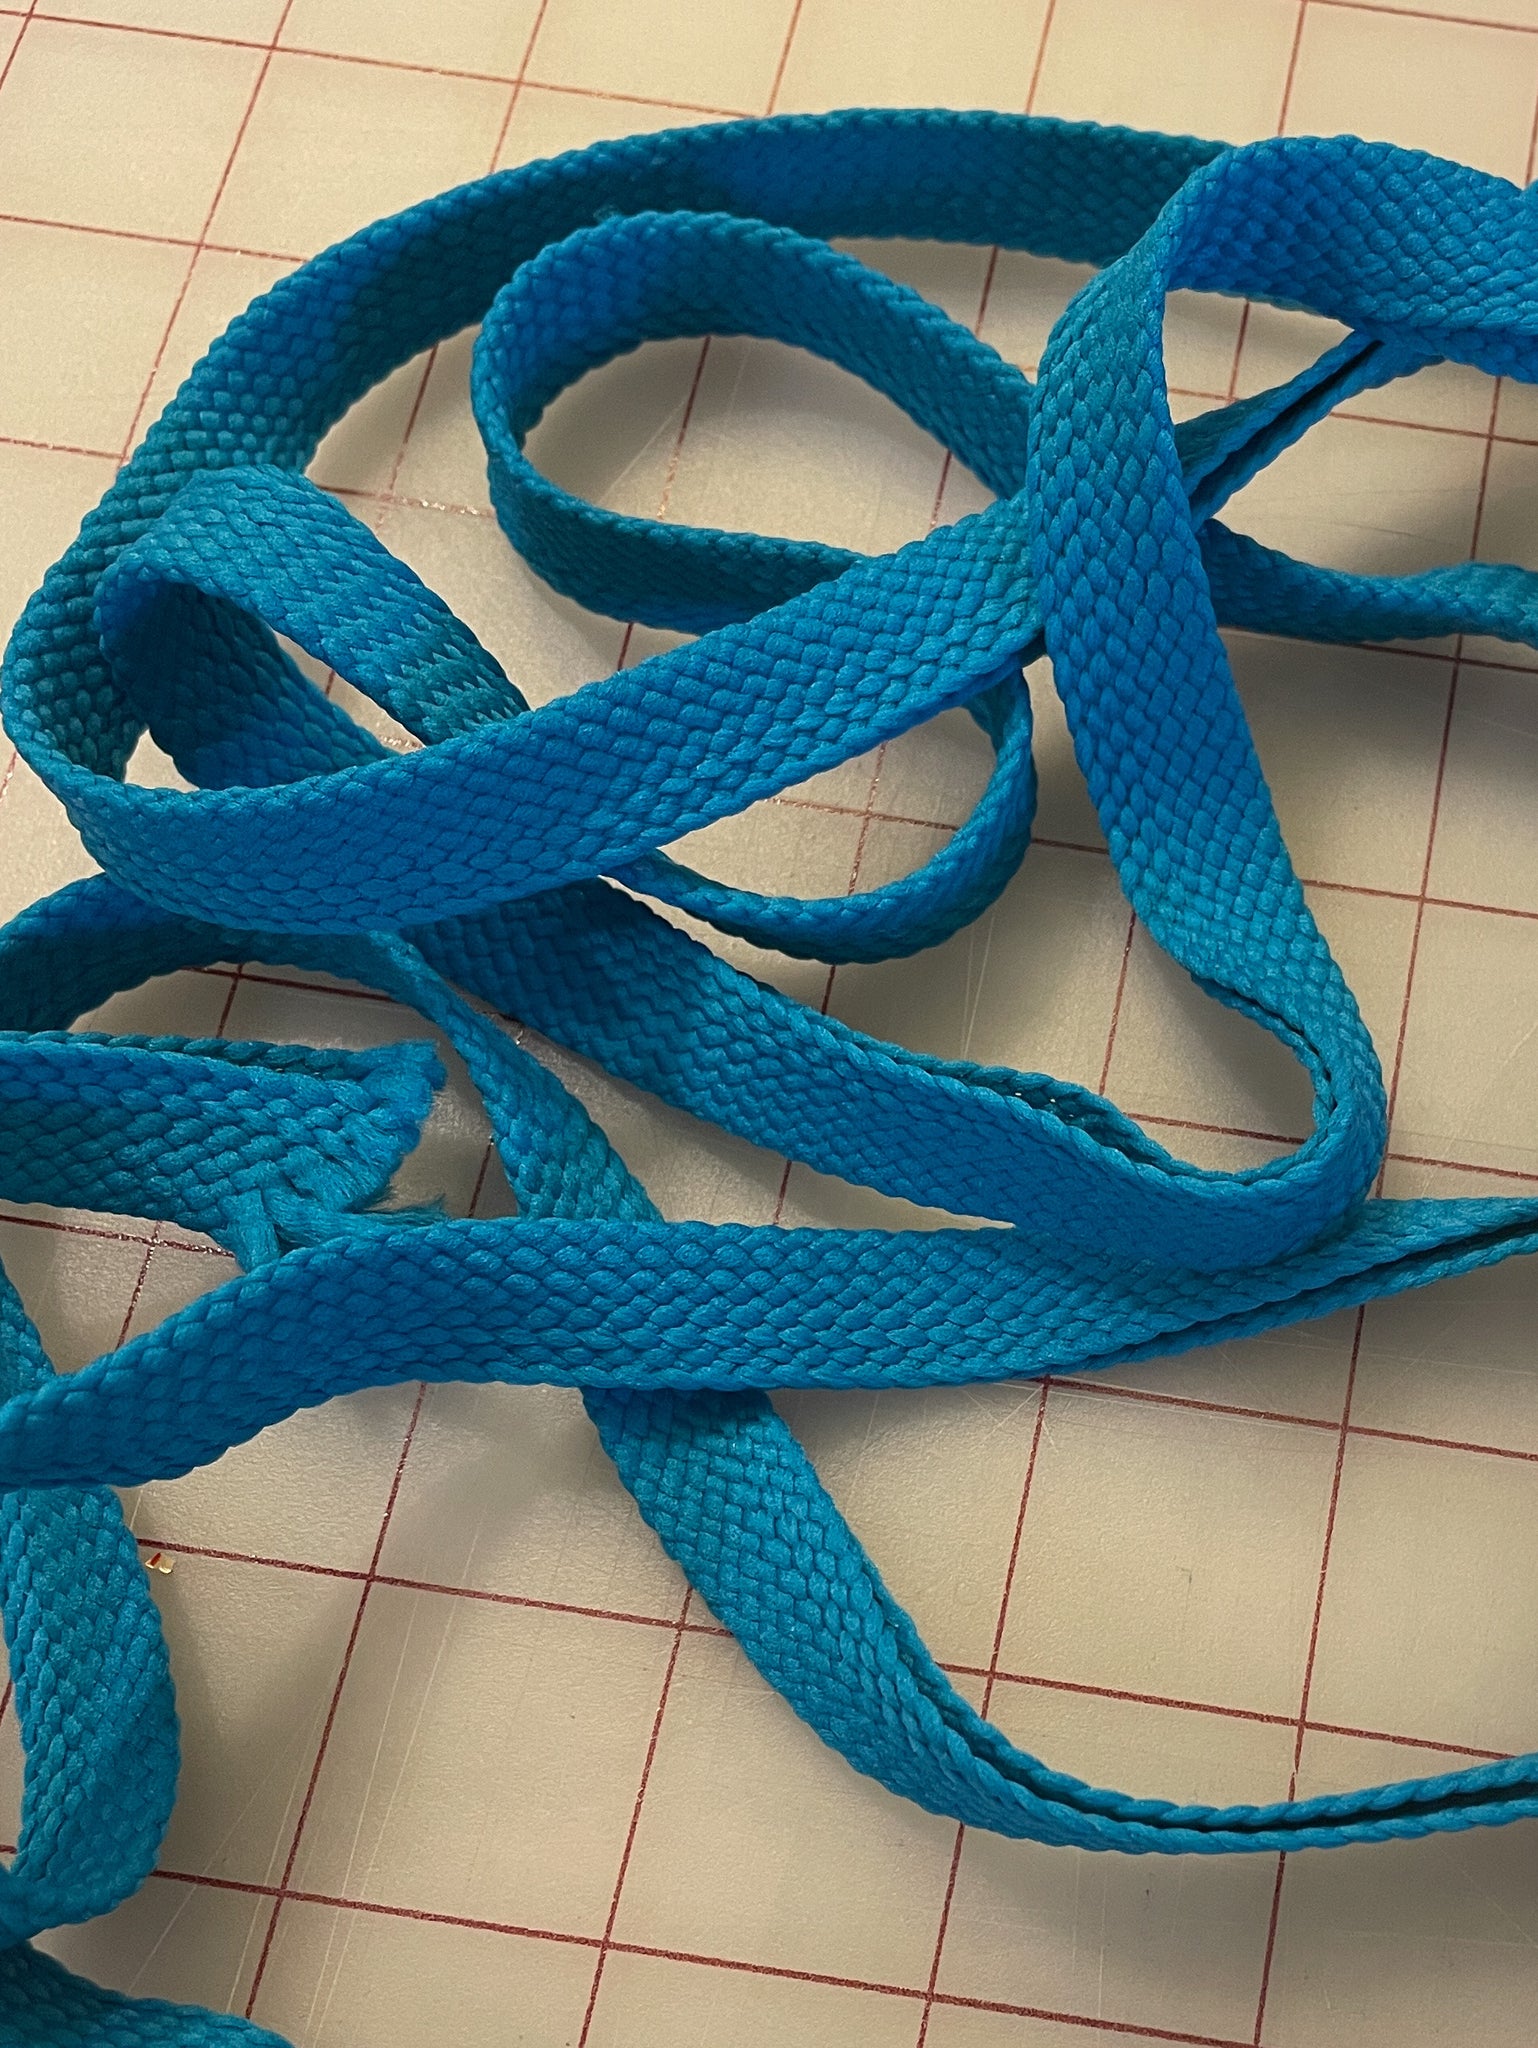 2 2/3 YD Braid Binding By the Yard Vintage Polyester - Turquoise